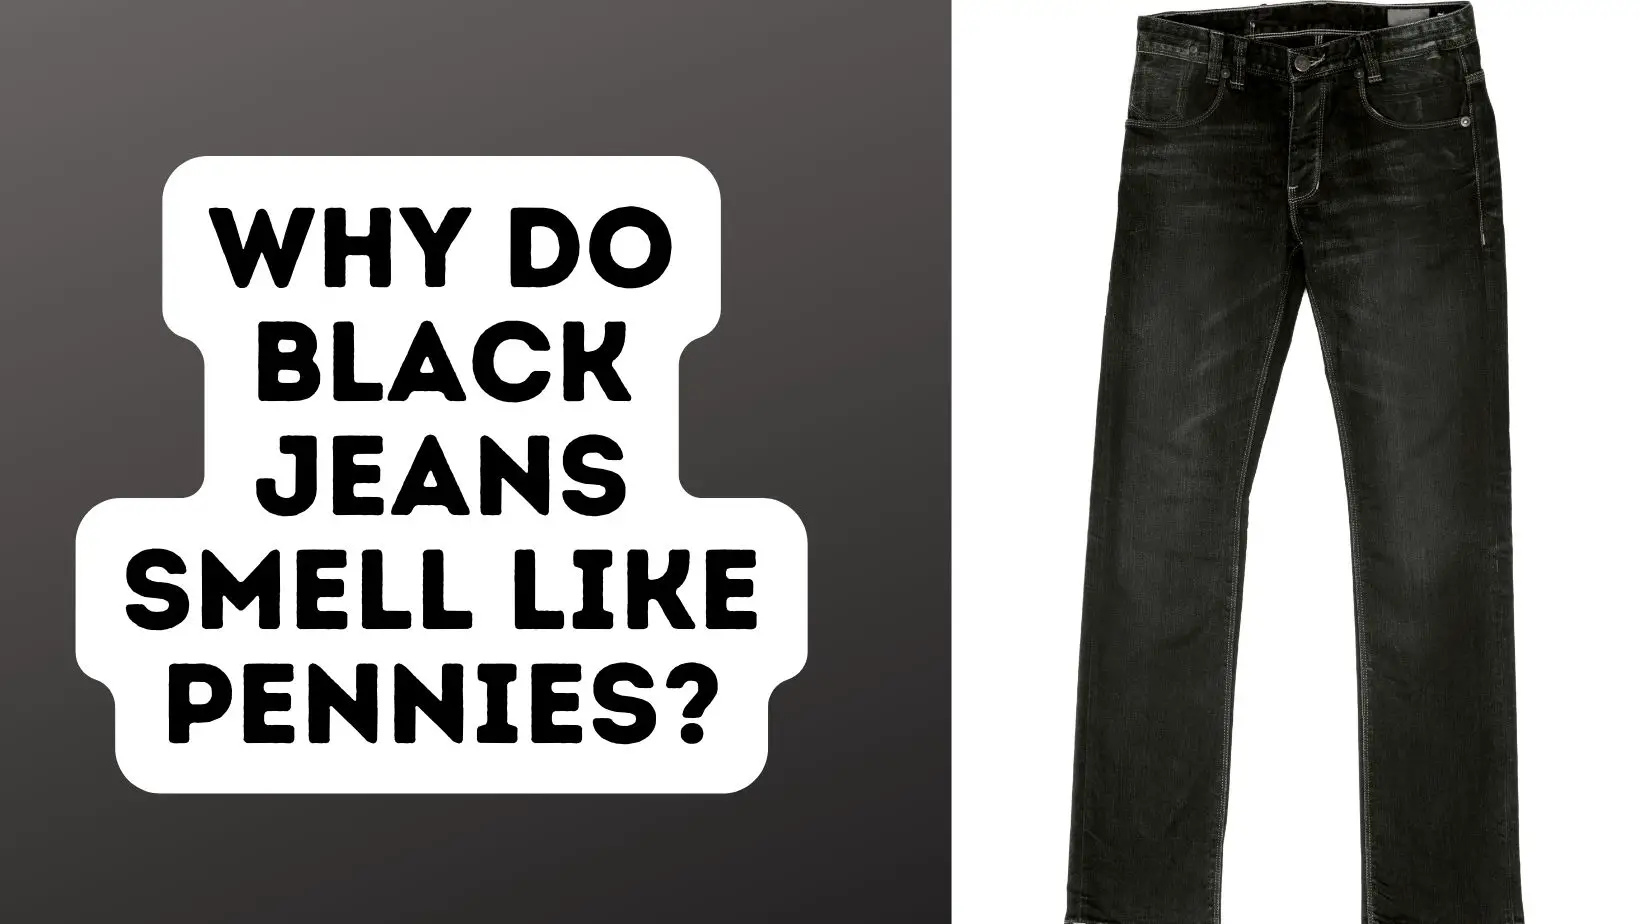 Why Do Black Jeans Smell Like Pennies?